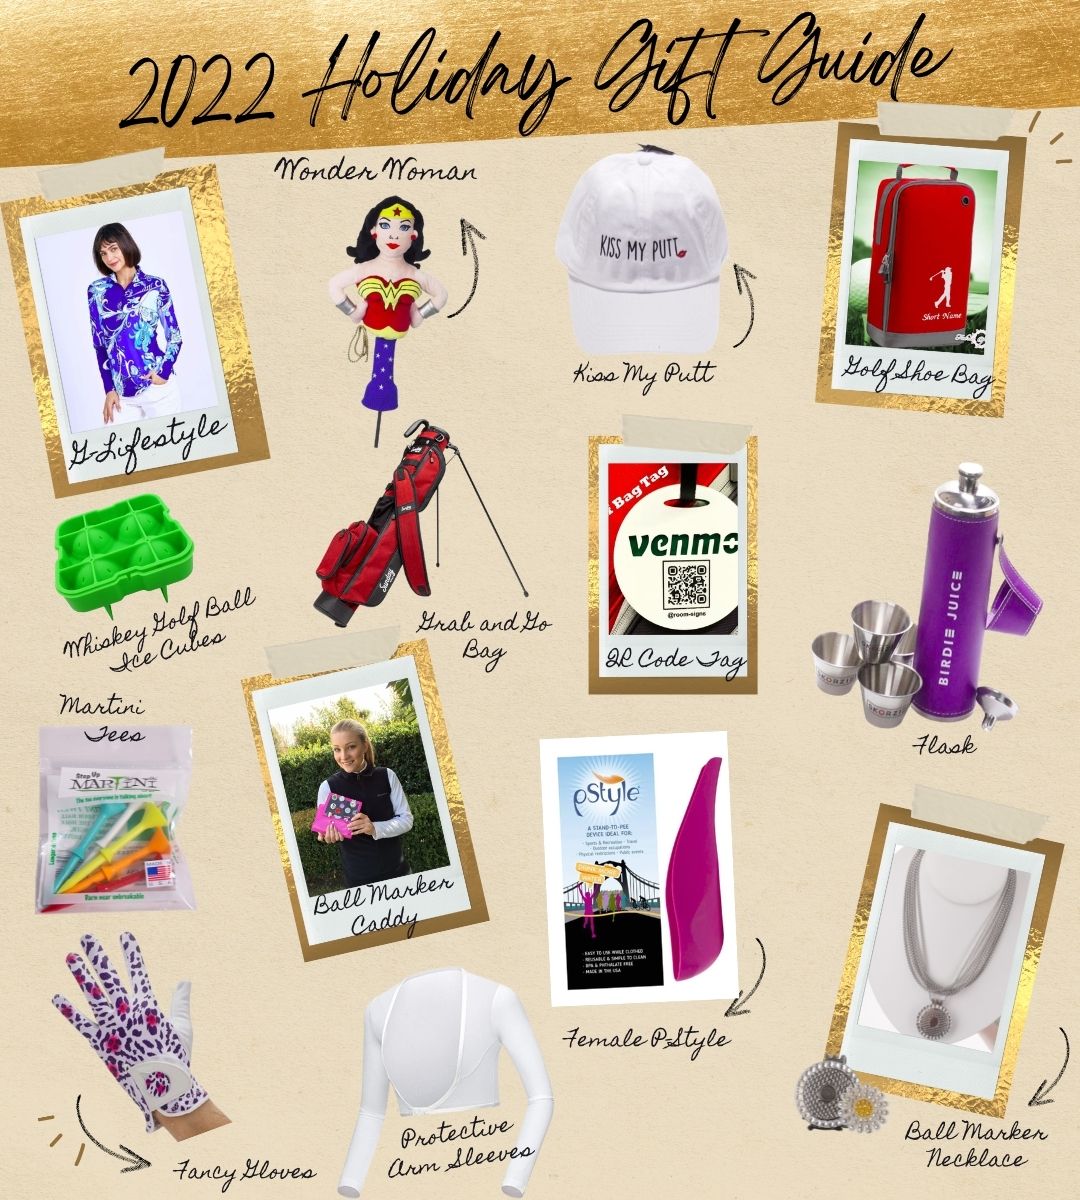 Eileen's 2022 Holiday Gift Guide for Golfing Gals!